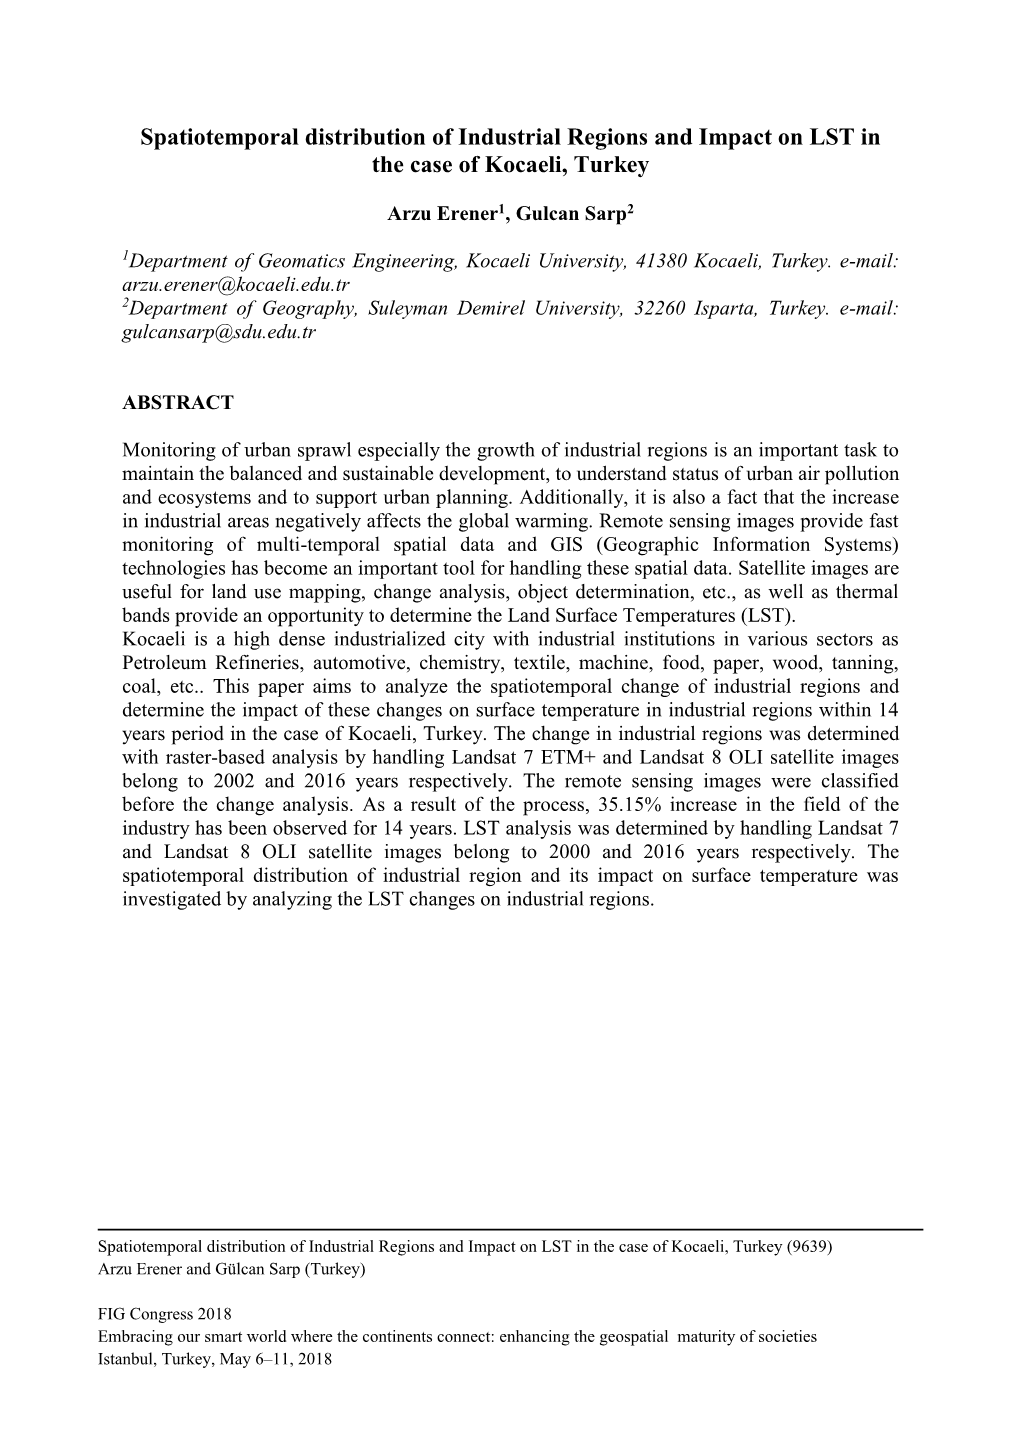 Spatiotemporal Distribution of Industrial Regions and Impact on LST in the Case of Kocaeli, Turkey